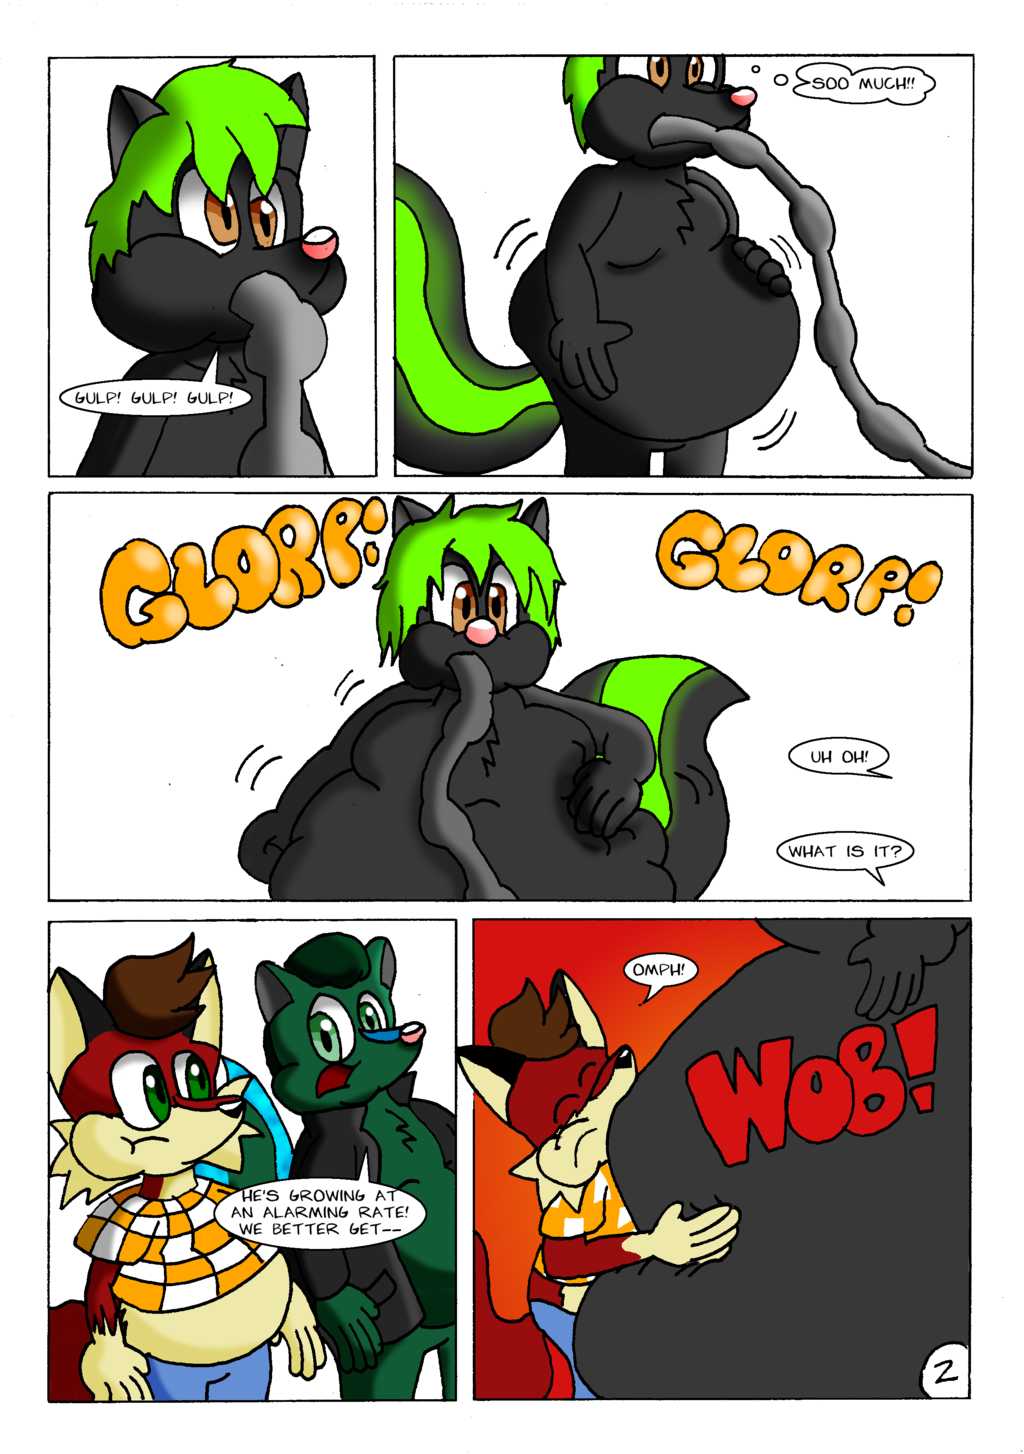 Hungry? - Page 2/3